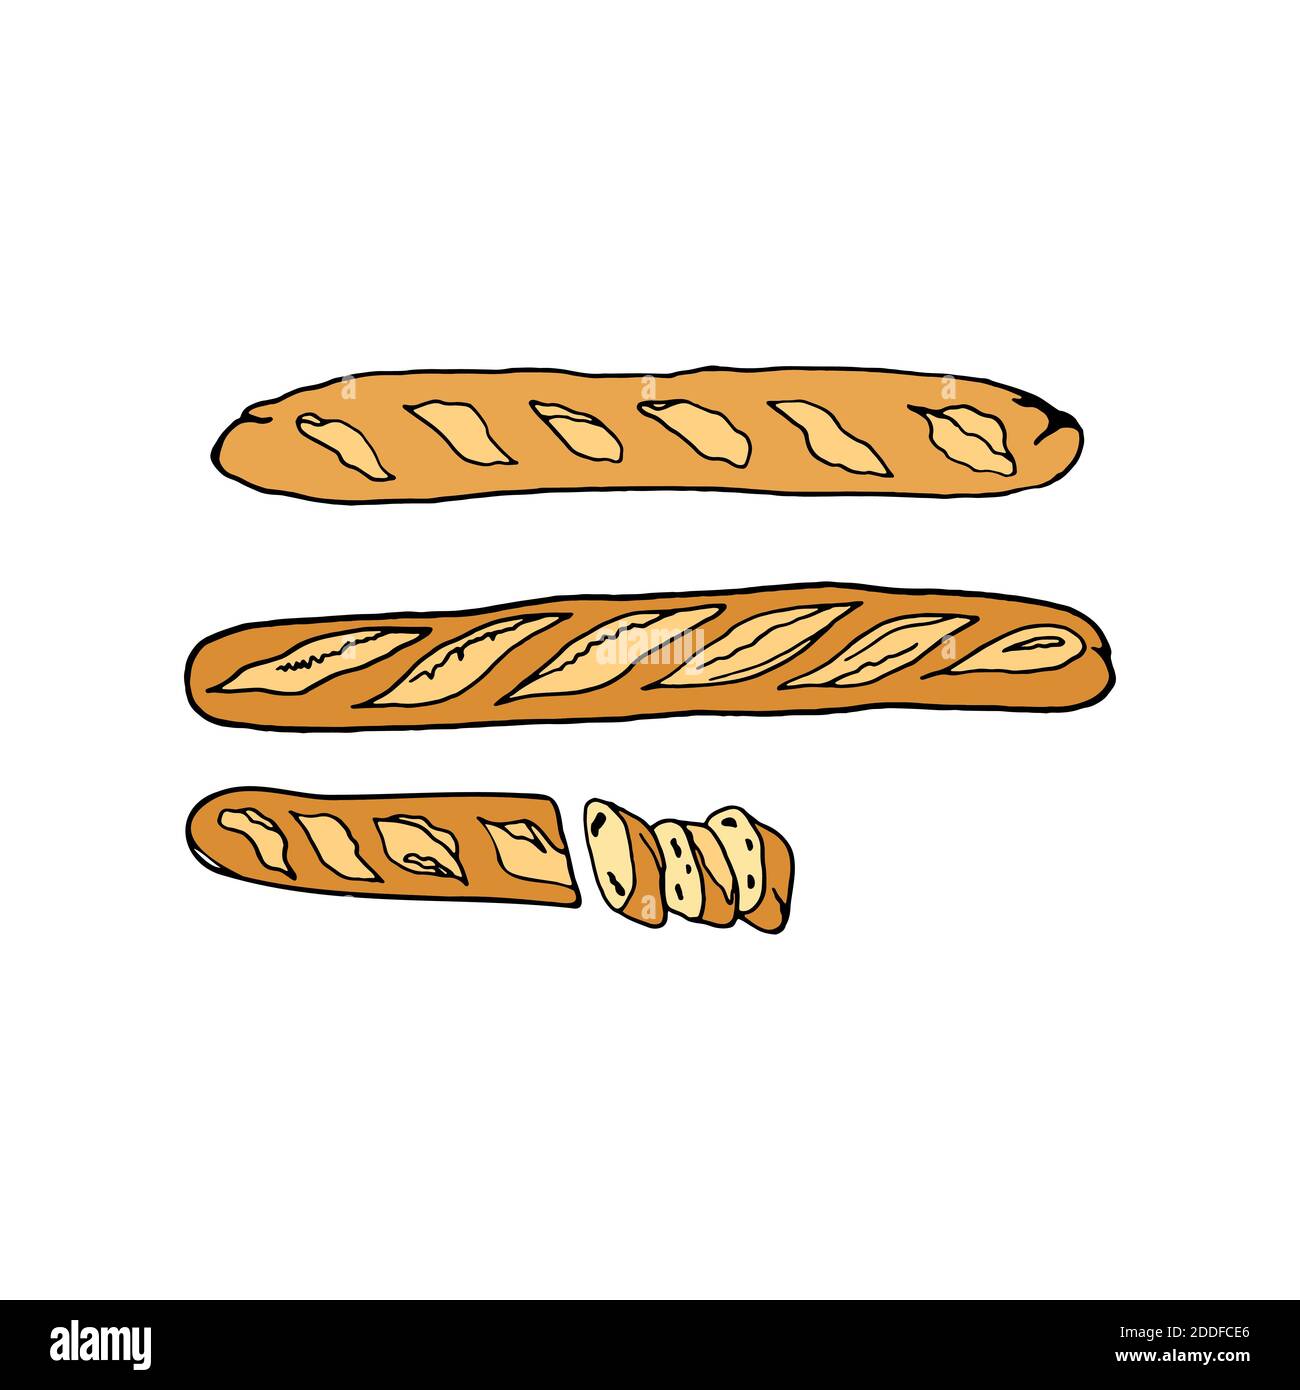 Vector hand drawn colorful baguette. French cuisine dish. Design sketch element for menu cafe, bistro, restaurant, bakery, label and packaging. Illust Stock Vector